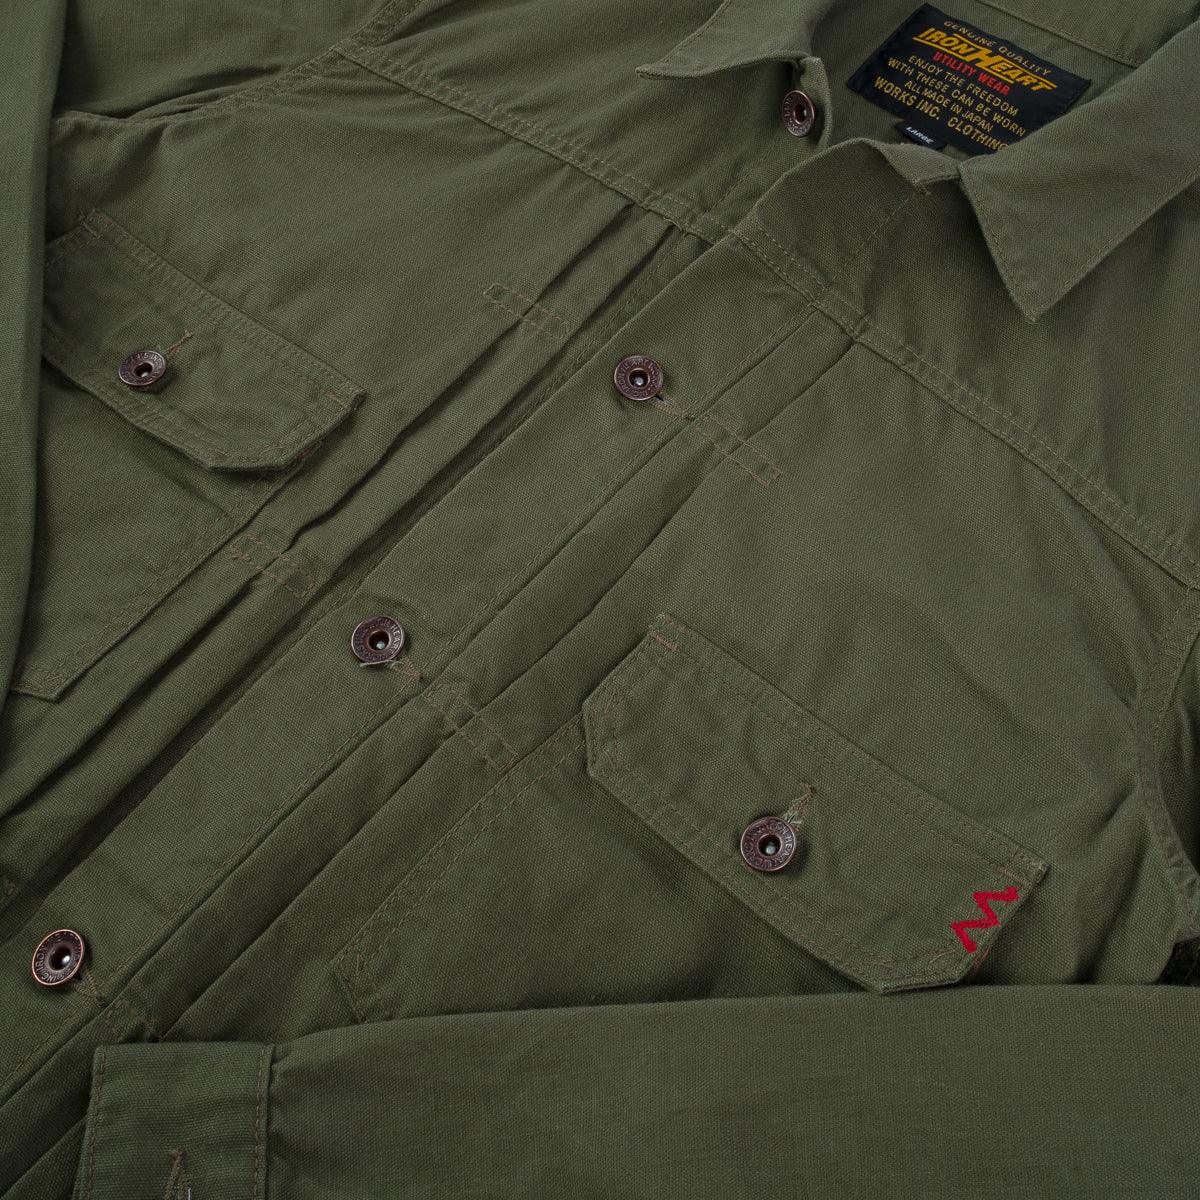 Image showing the IHJ-134-ODG - 9oz Paraffin Coated OX Type II Jacket - Olive Drab Green which is a Jackets described by the following info SS24 and sold on the IRON HEART GERMANY online store